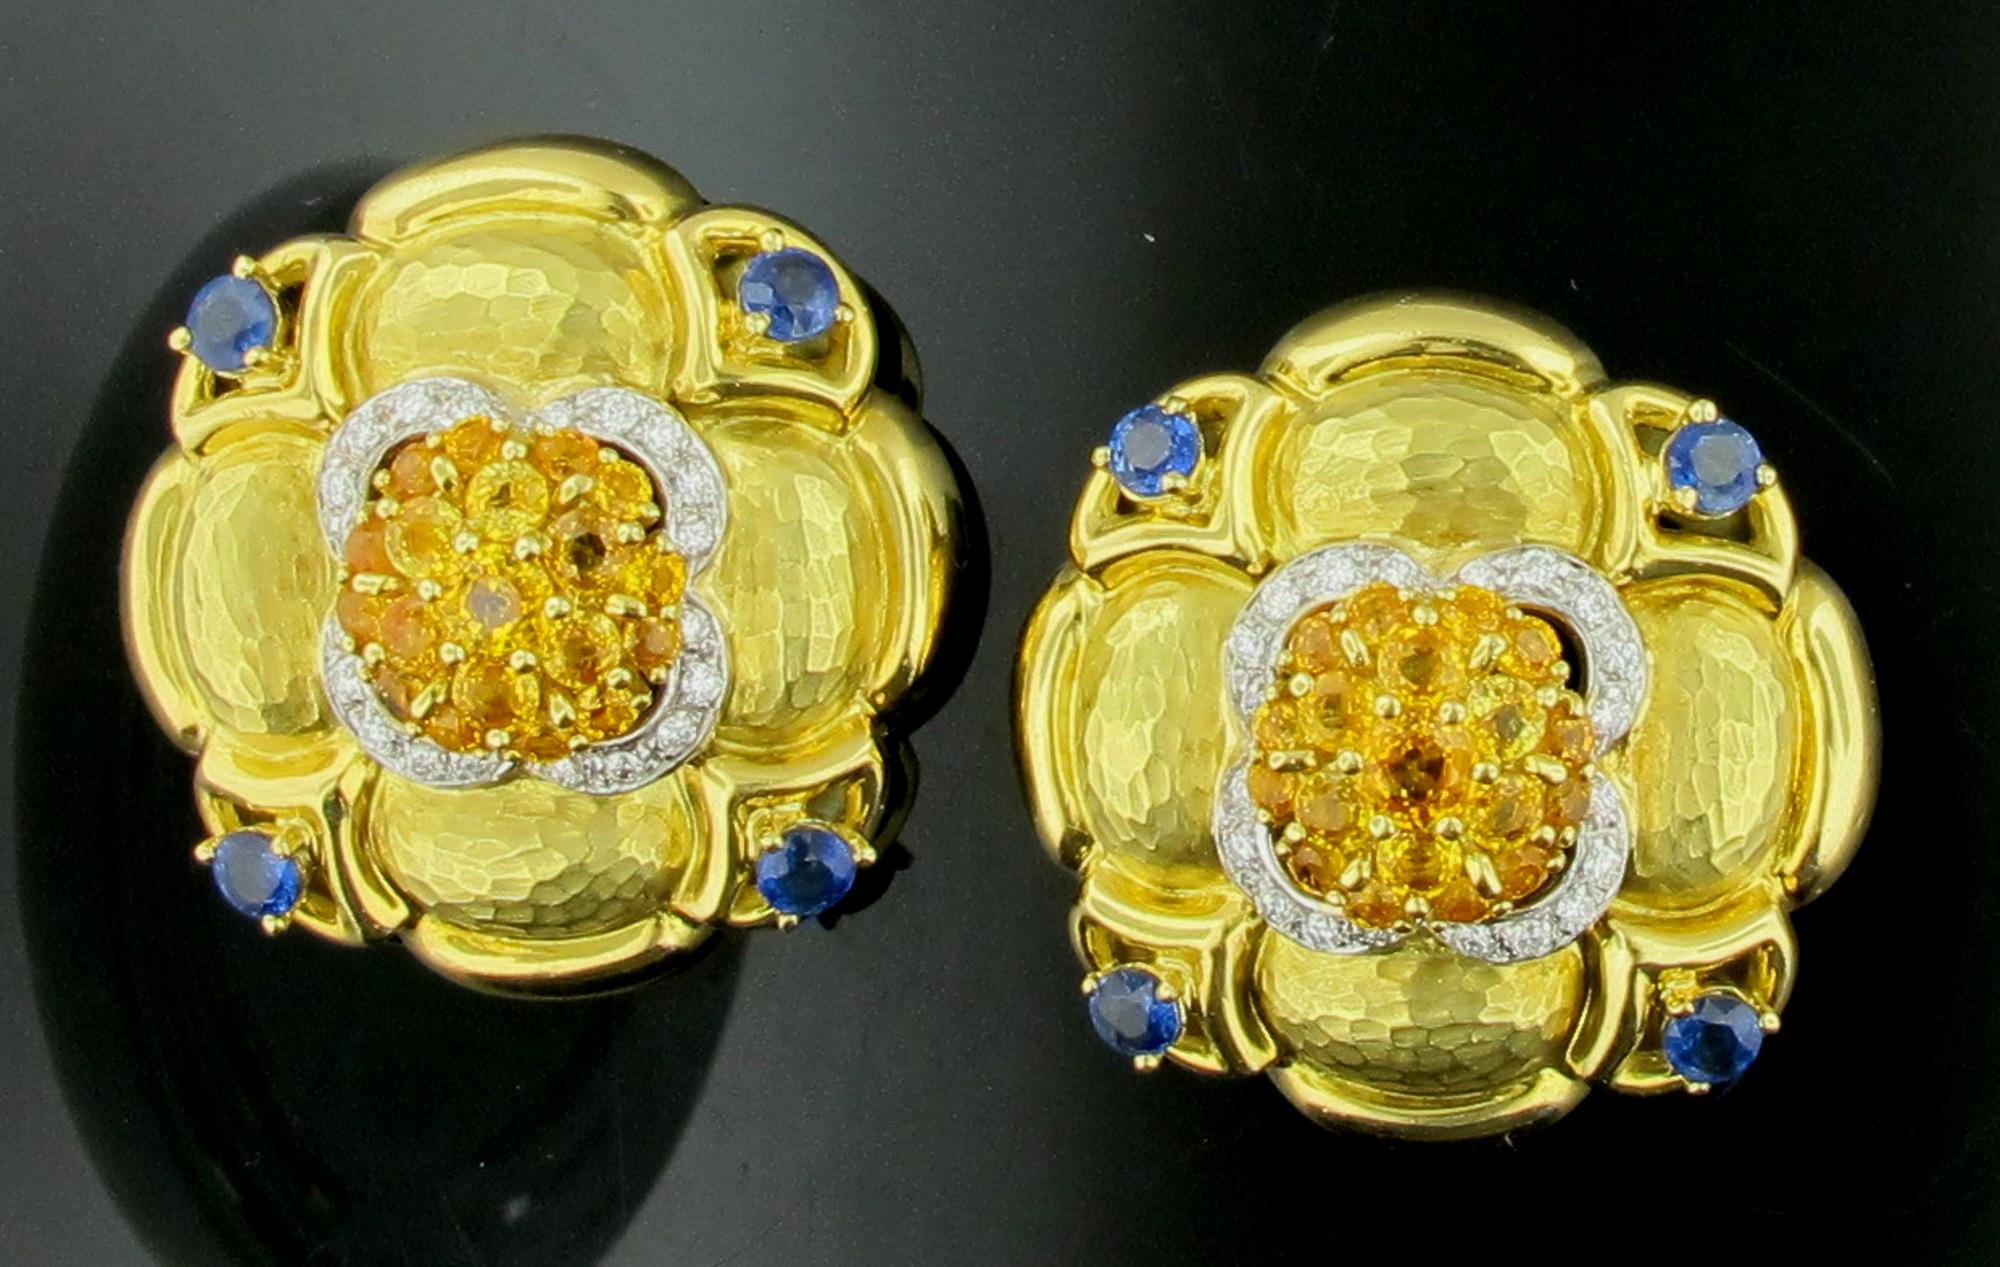 Set in 18 karat hammered yellow gold are 38 natural yellow sapphires with a total weight of approximately 7.00 carats,  8 natural blue sapphires with a total weight of approximately 1.50 carats and 40 round brilliant cut diamonds with a weight of